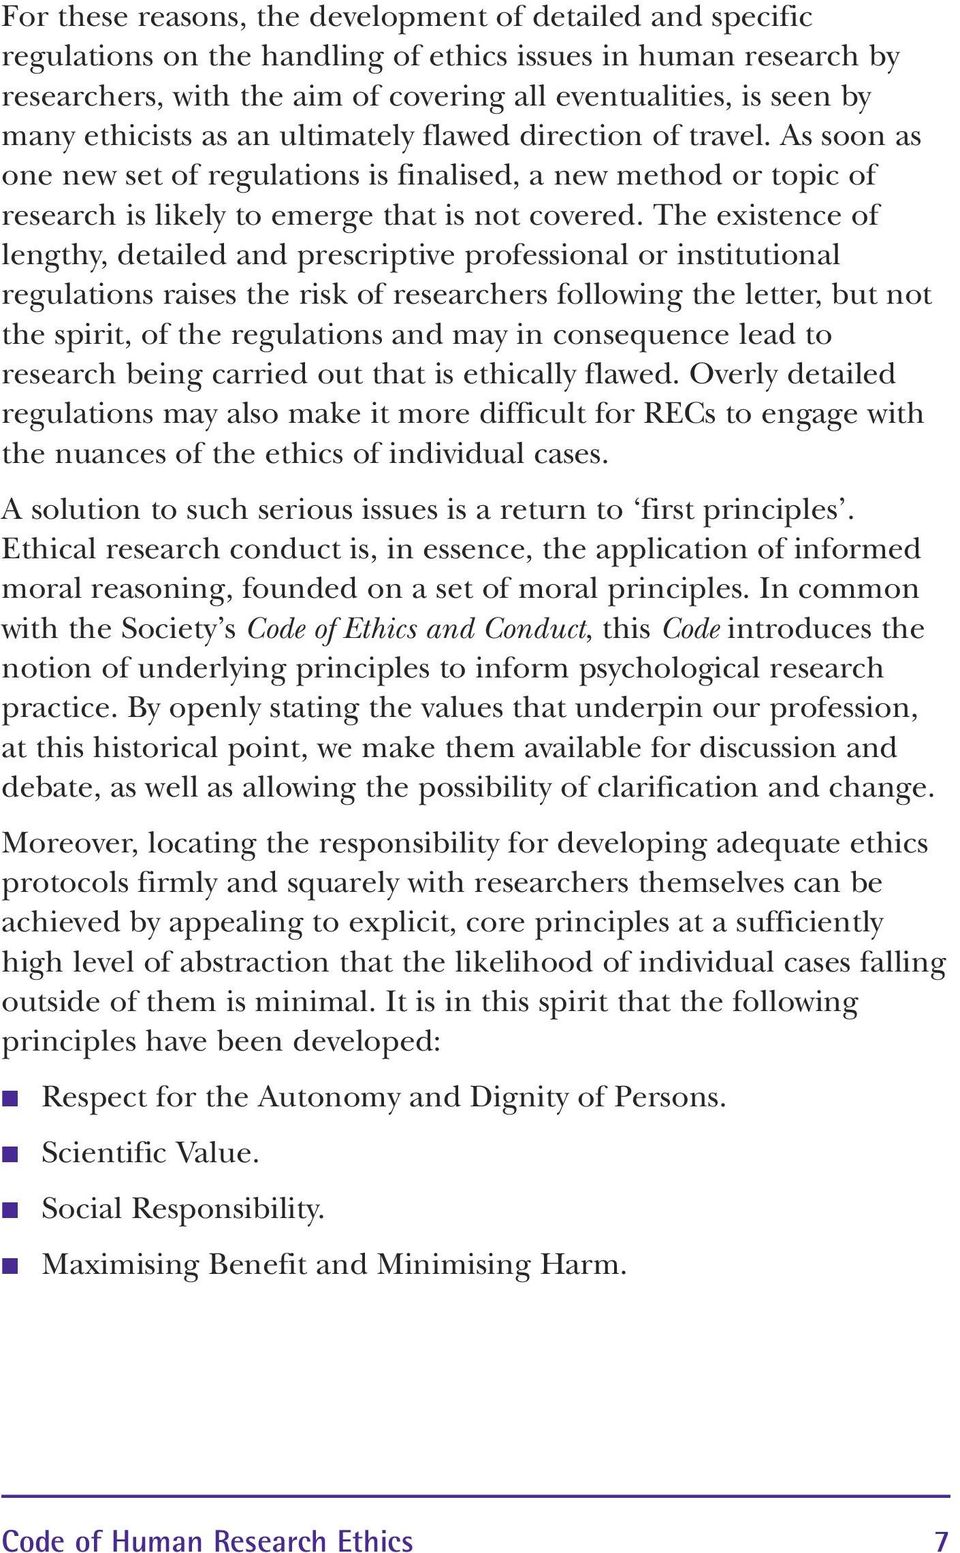 The existence of lengthy, detailed and prescriptive professional or institutional regulations raises the risk of researchers following the letter, but not the spirit, of the regulations and may in